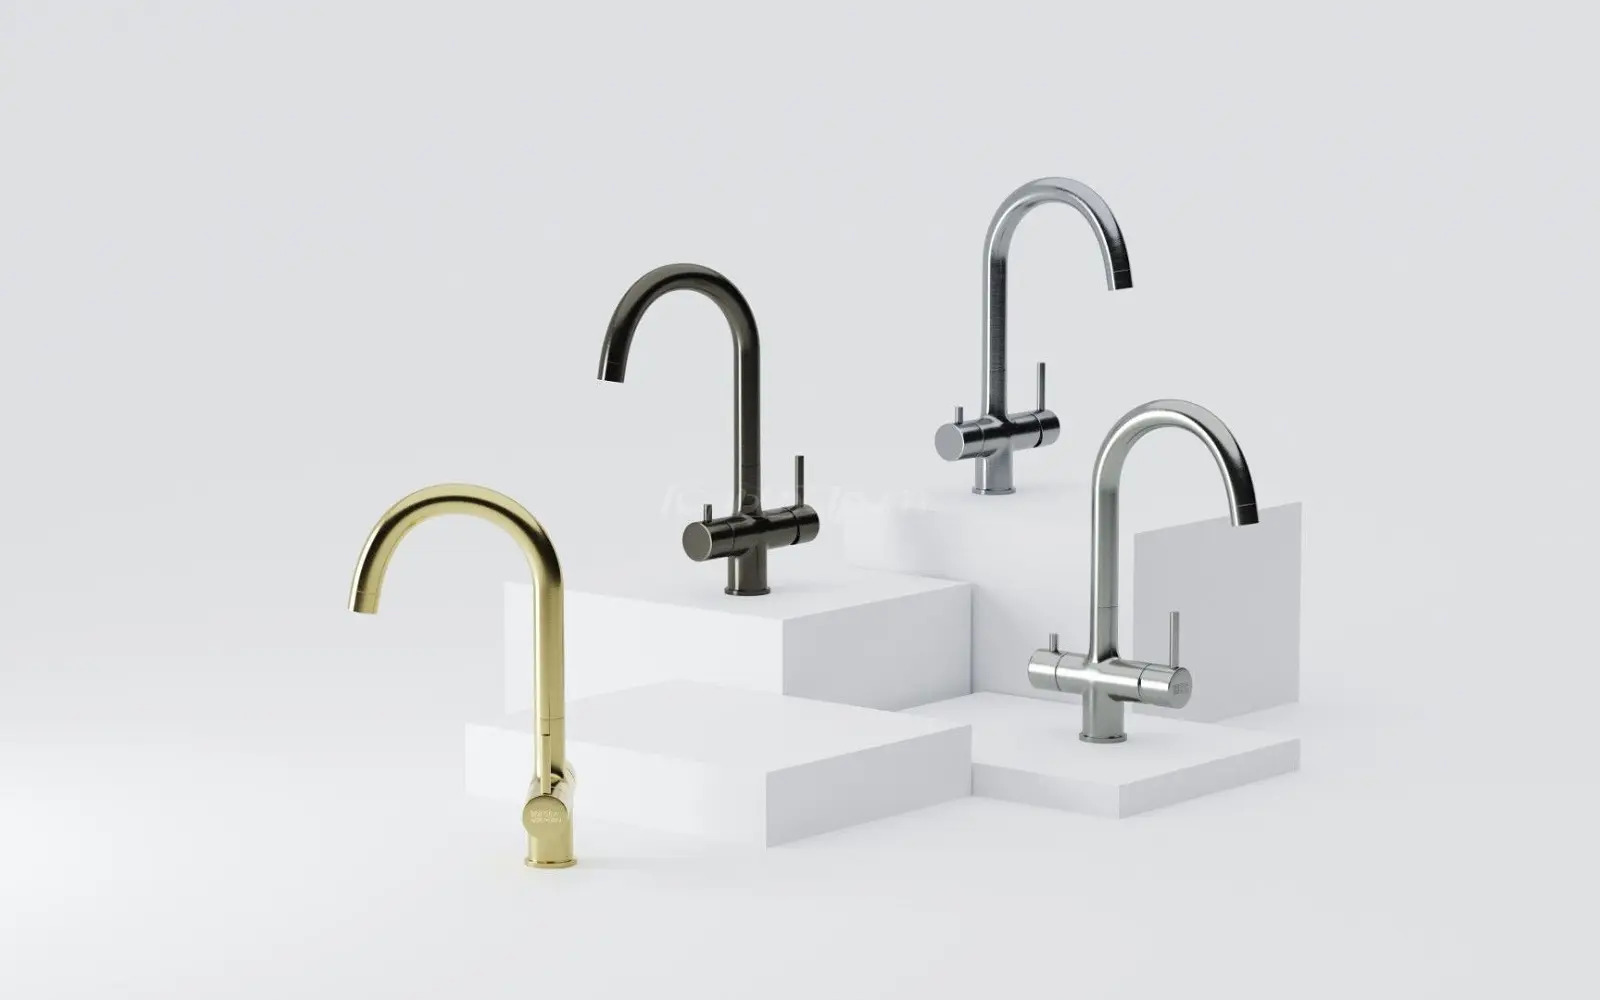 What Are The Best Faucet Brands